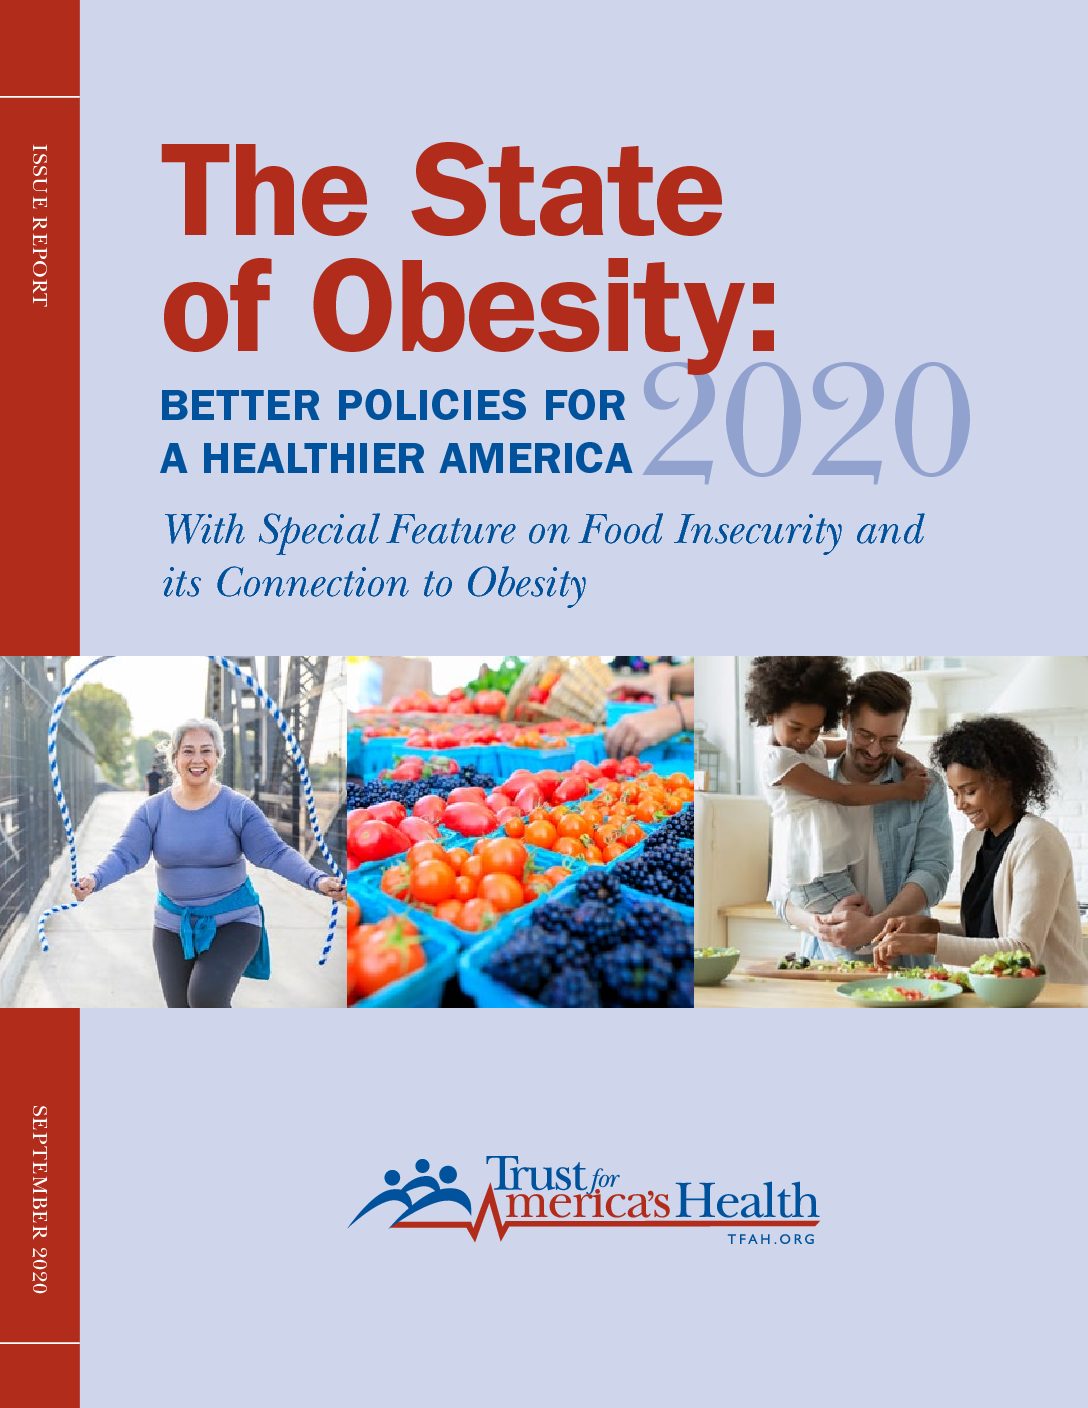 The State of Obesity 2020: Better Policies for a Healthier America